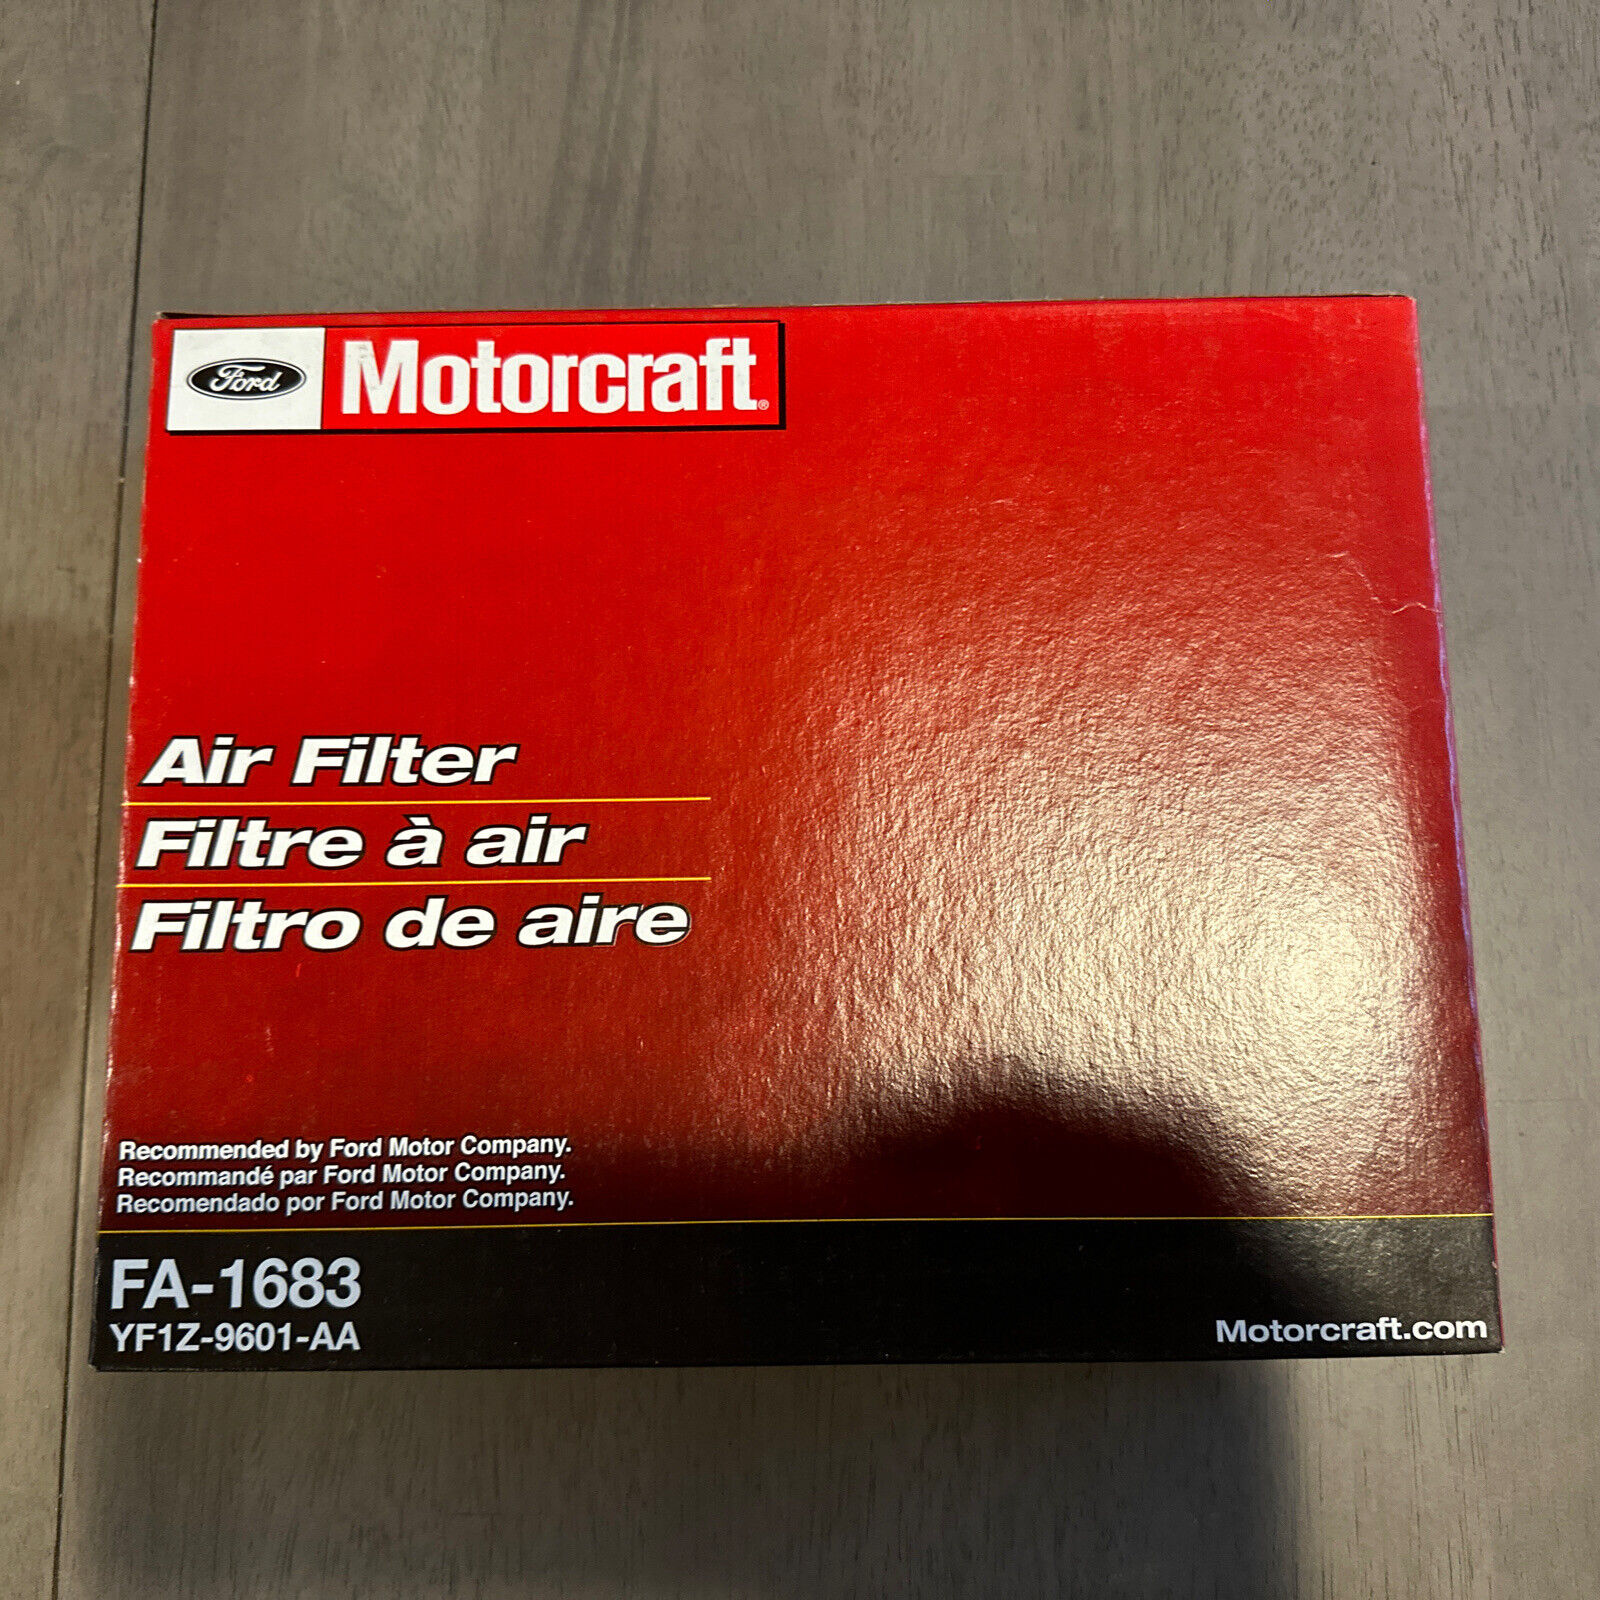 FA-1683 Motorcraft Air Filter New for Ford Taurus Mazda Tribute Mercury Sable